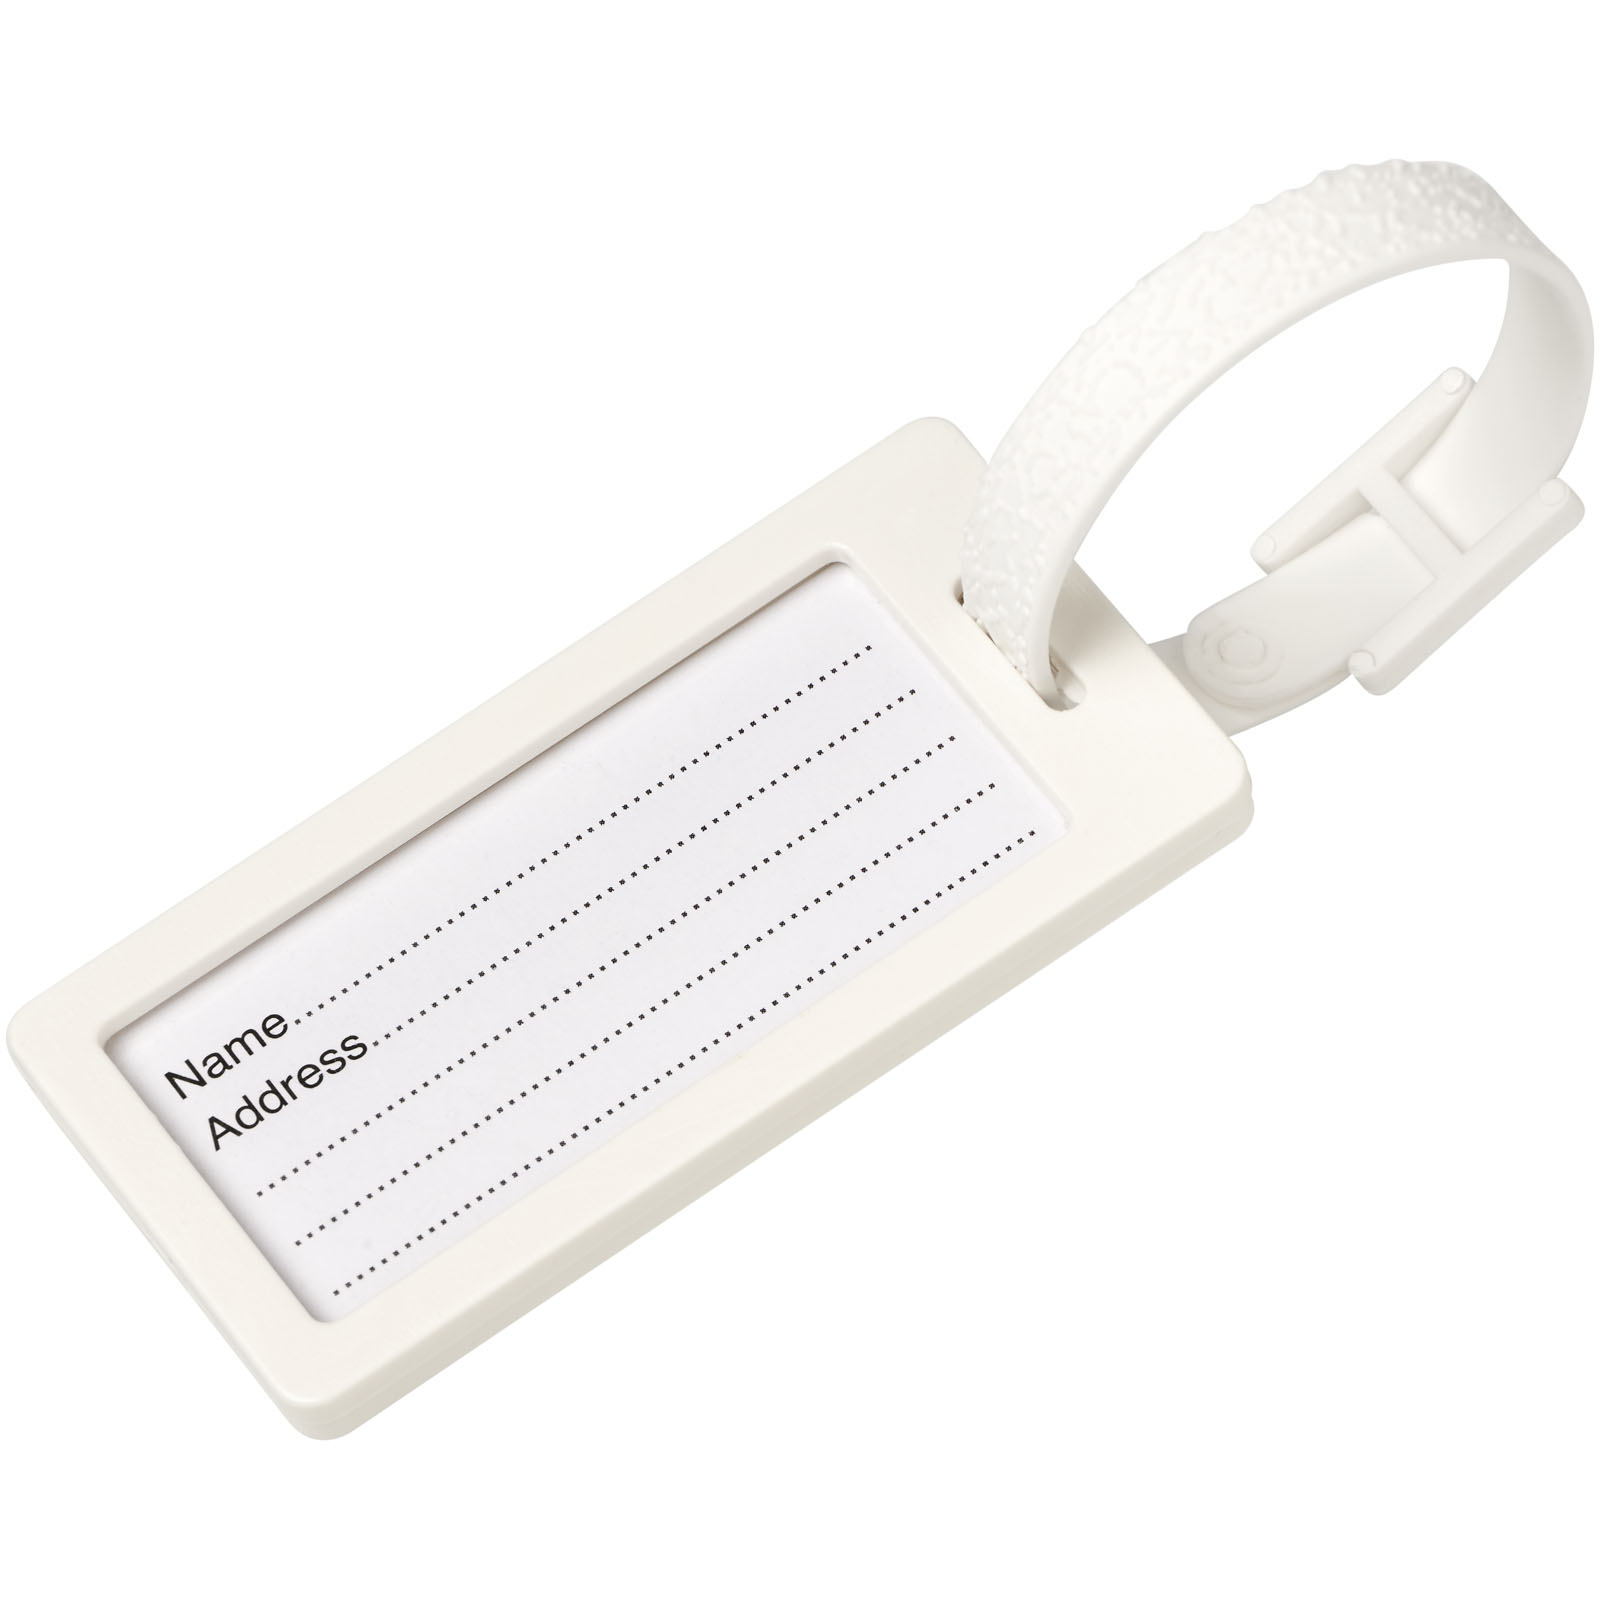 Sports & Leisure - River recycled window luggage tag